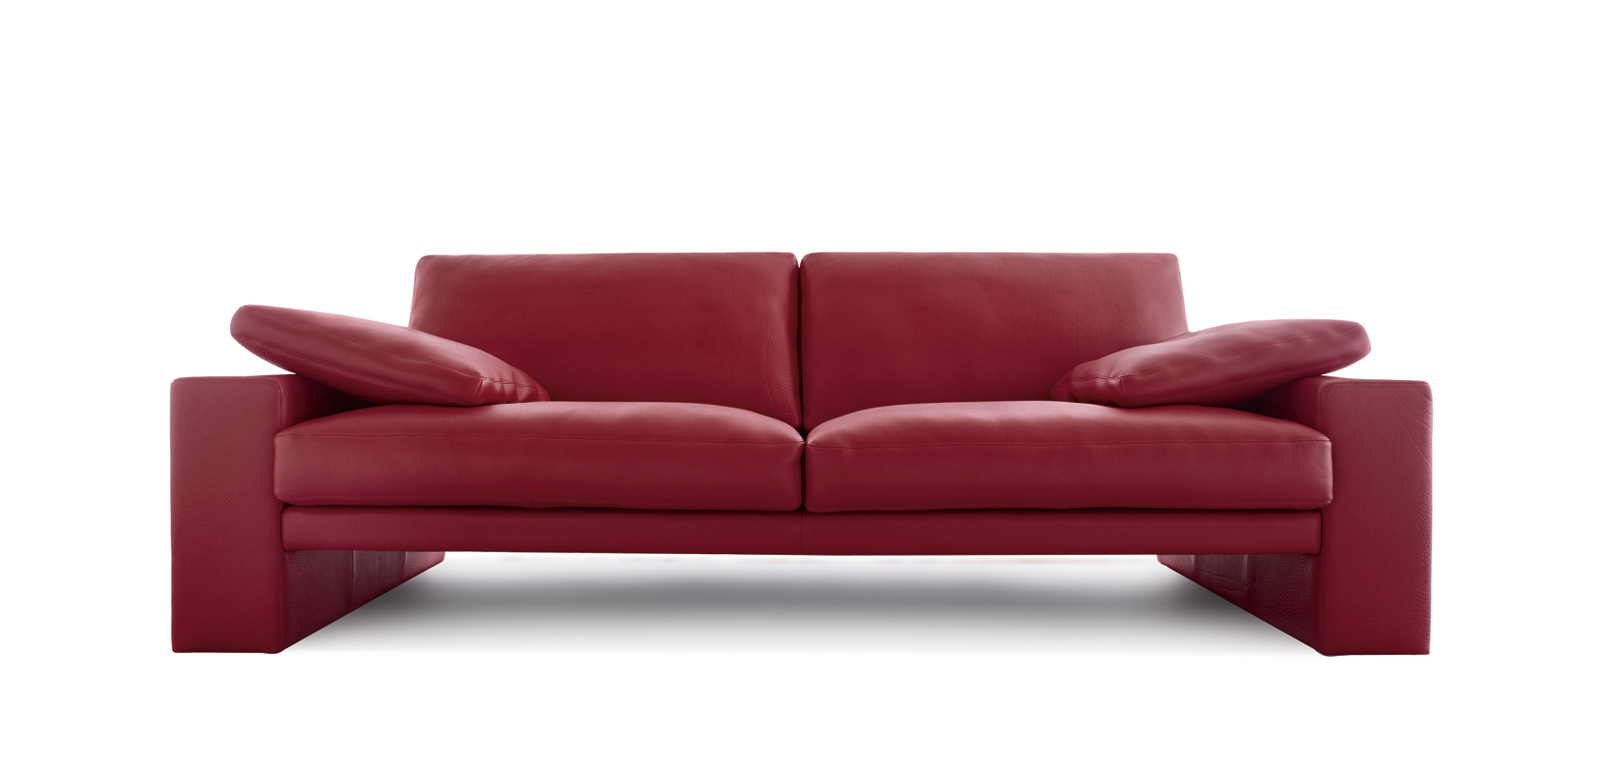 Front view CL100 in dark red leather with matching cushions.